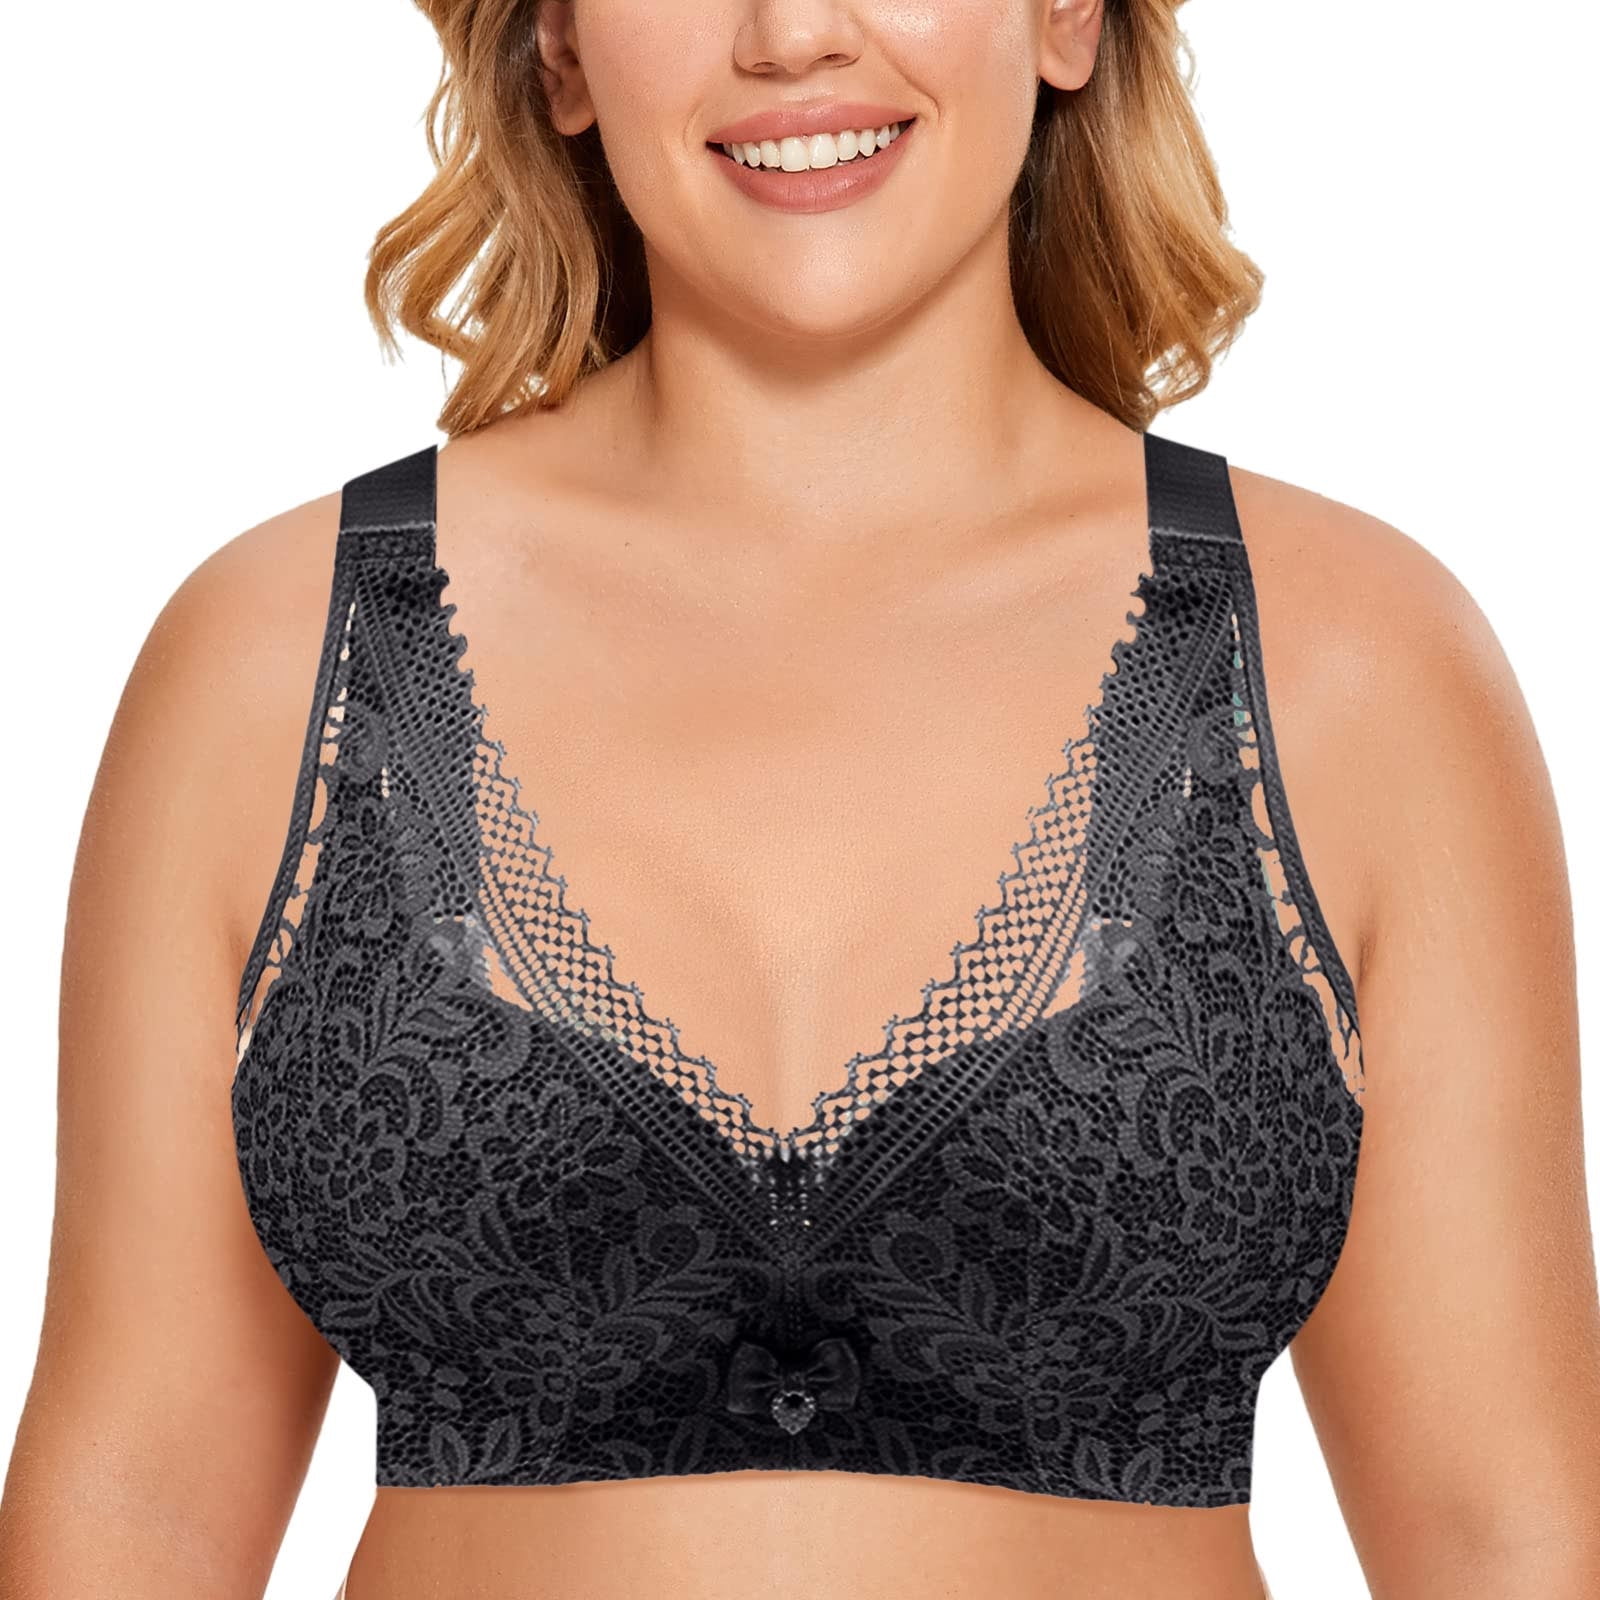 CHICTRY Womens Underwired Bra Sheer Lace Exotic Unlined Bralette